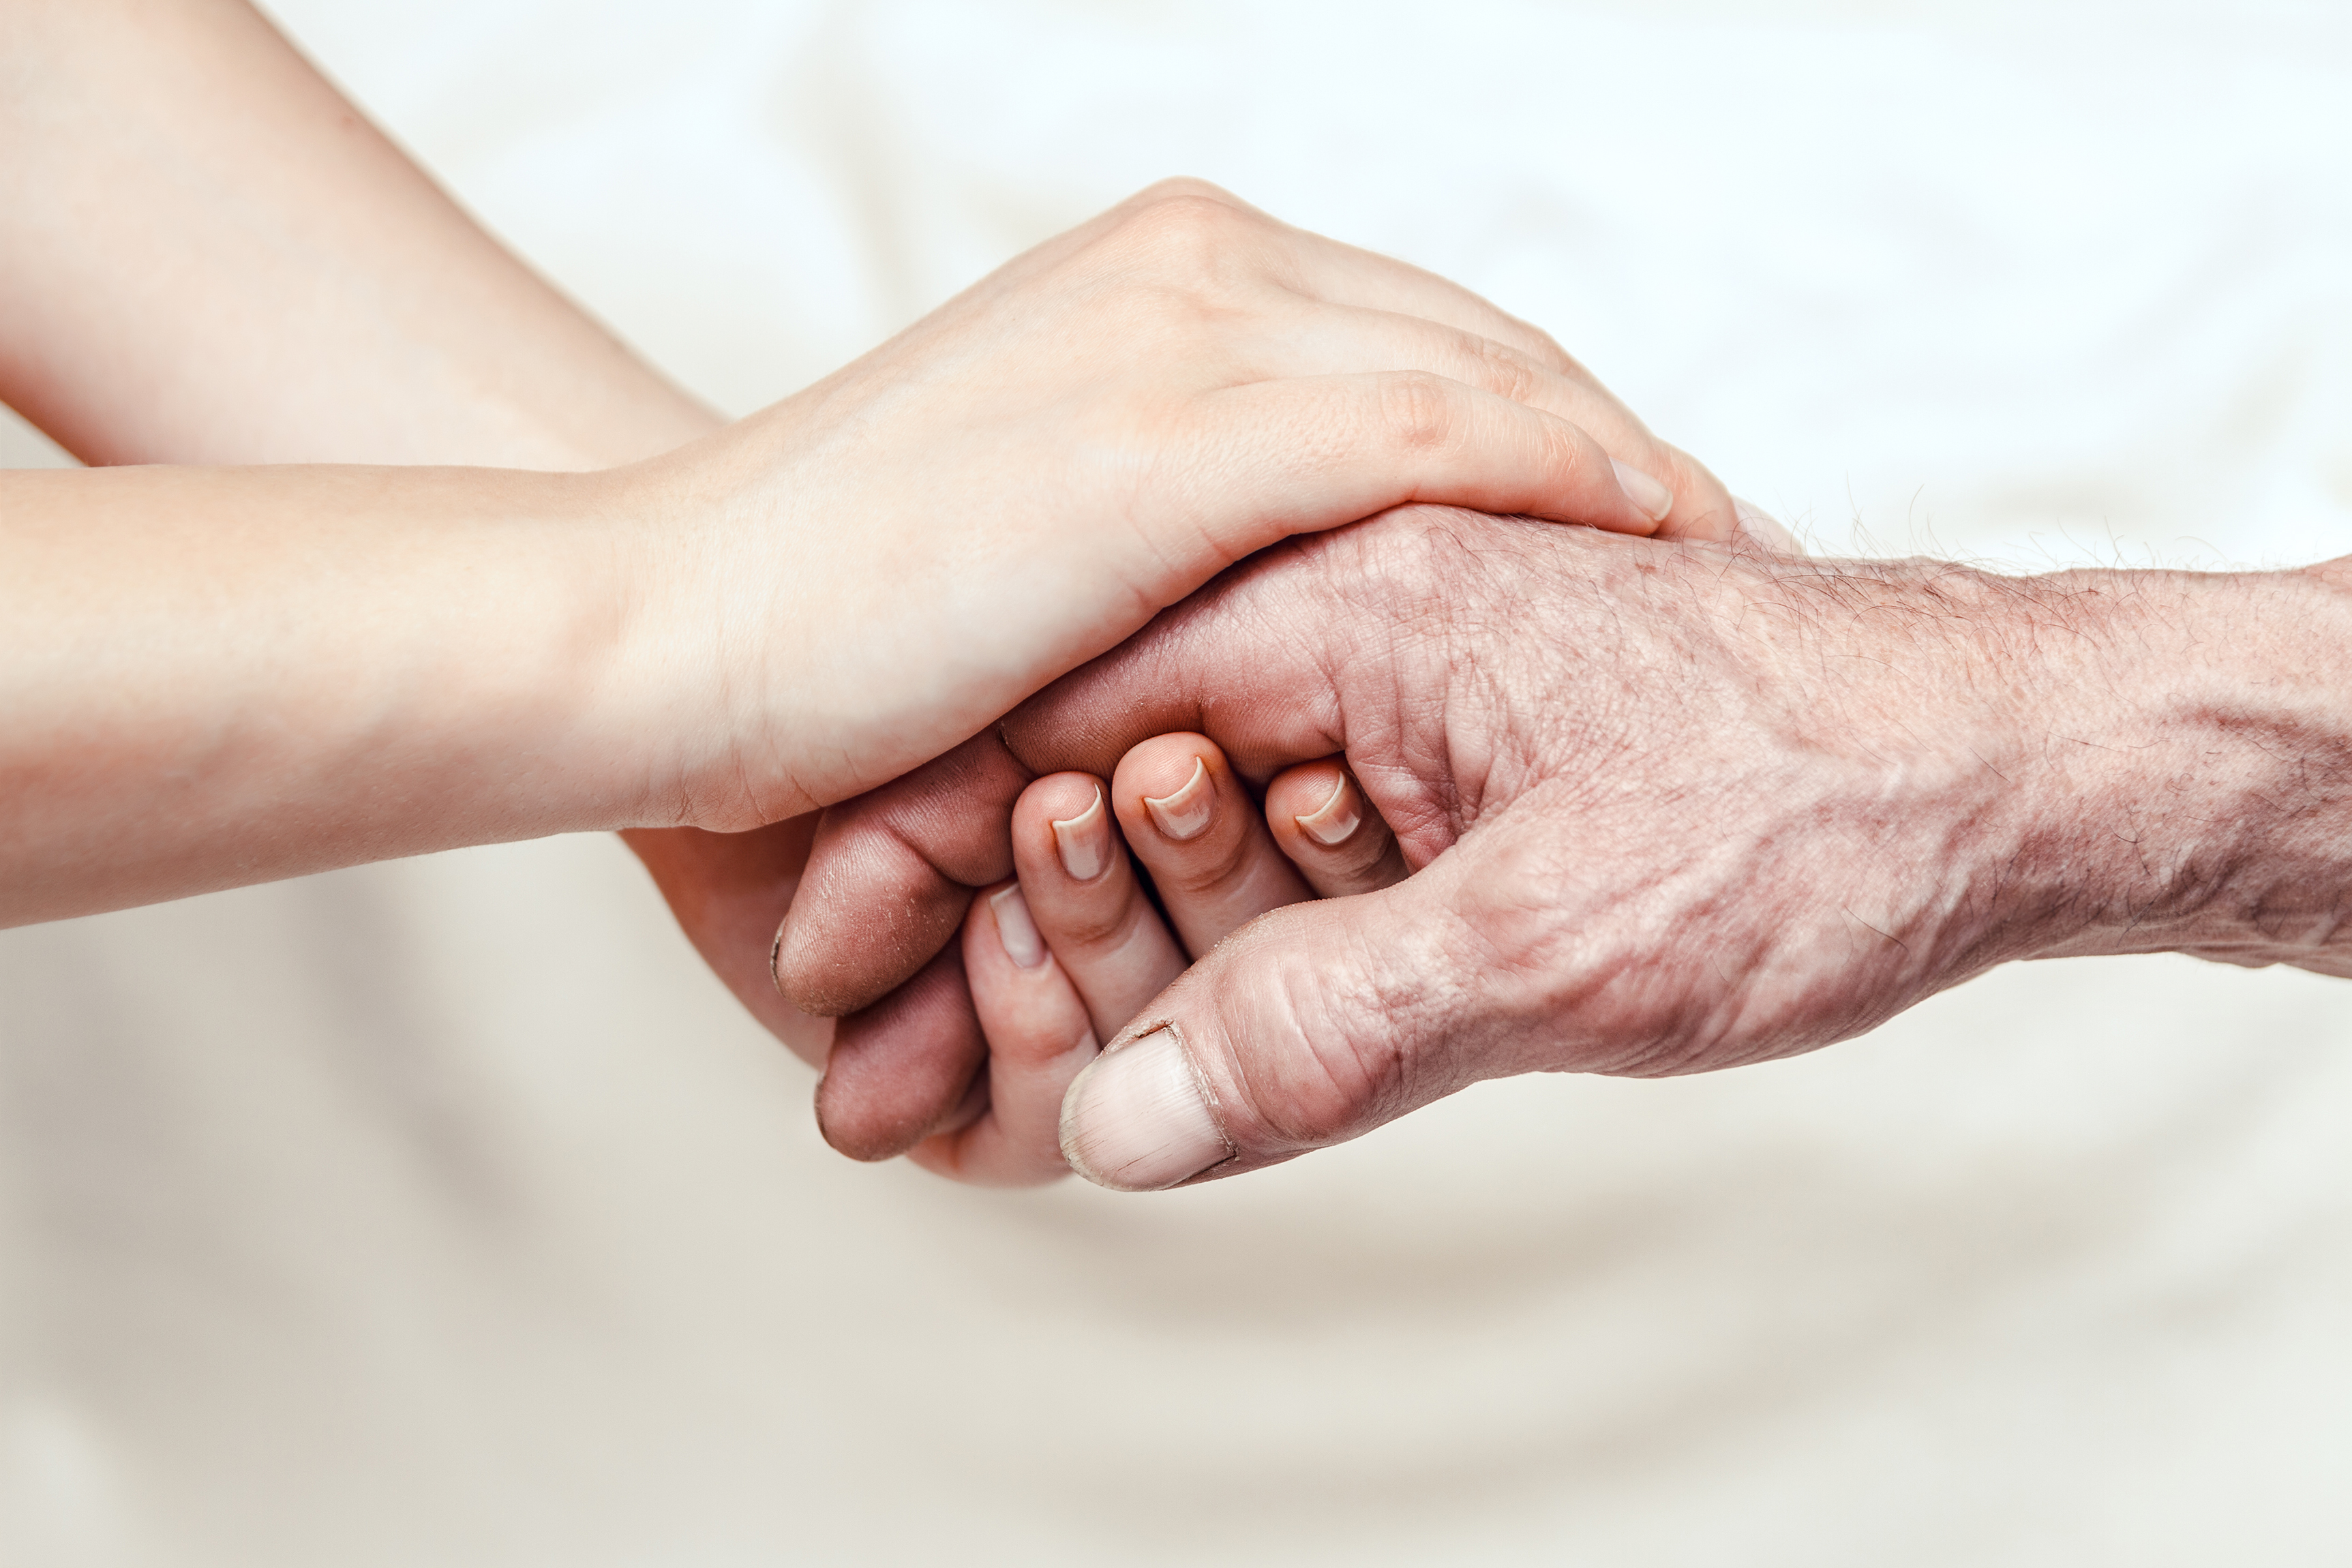 Hands of the old woman and a young woman | Source: Shutterstock